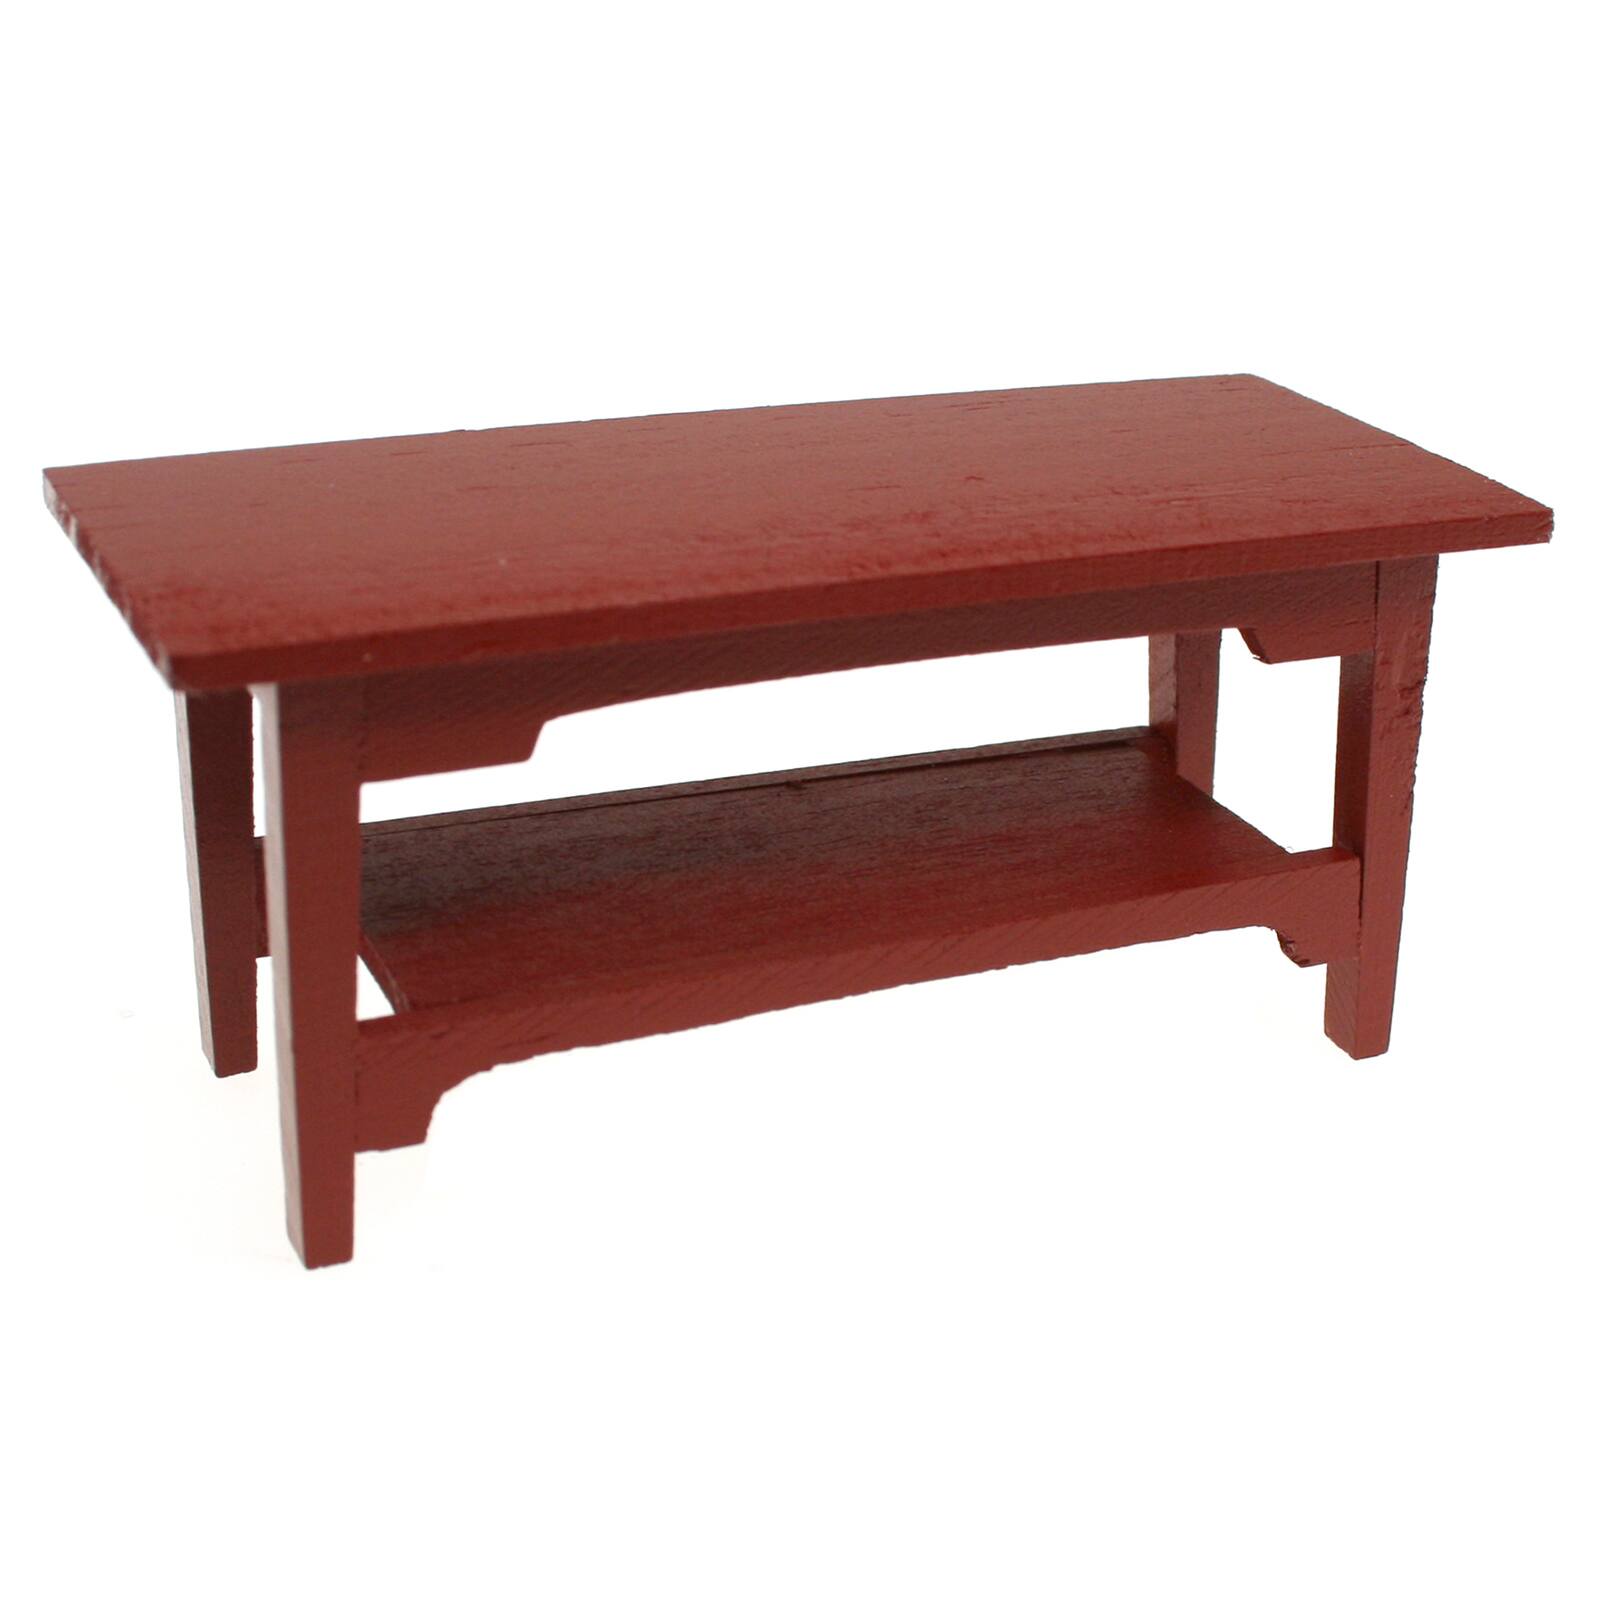 Shop For The Sparrow Innovations Miniatures Wood Table Red At